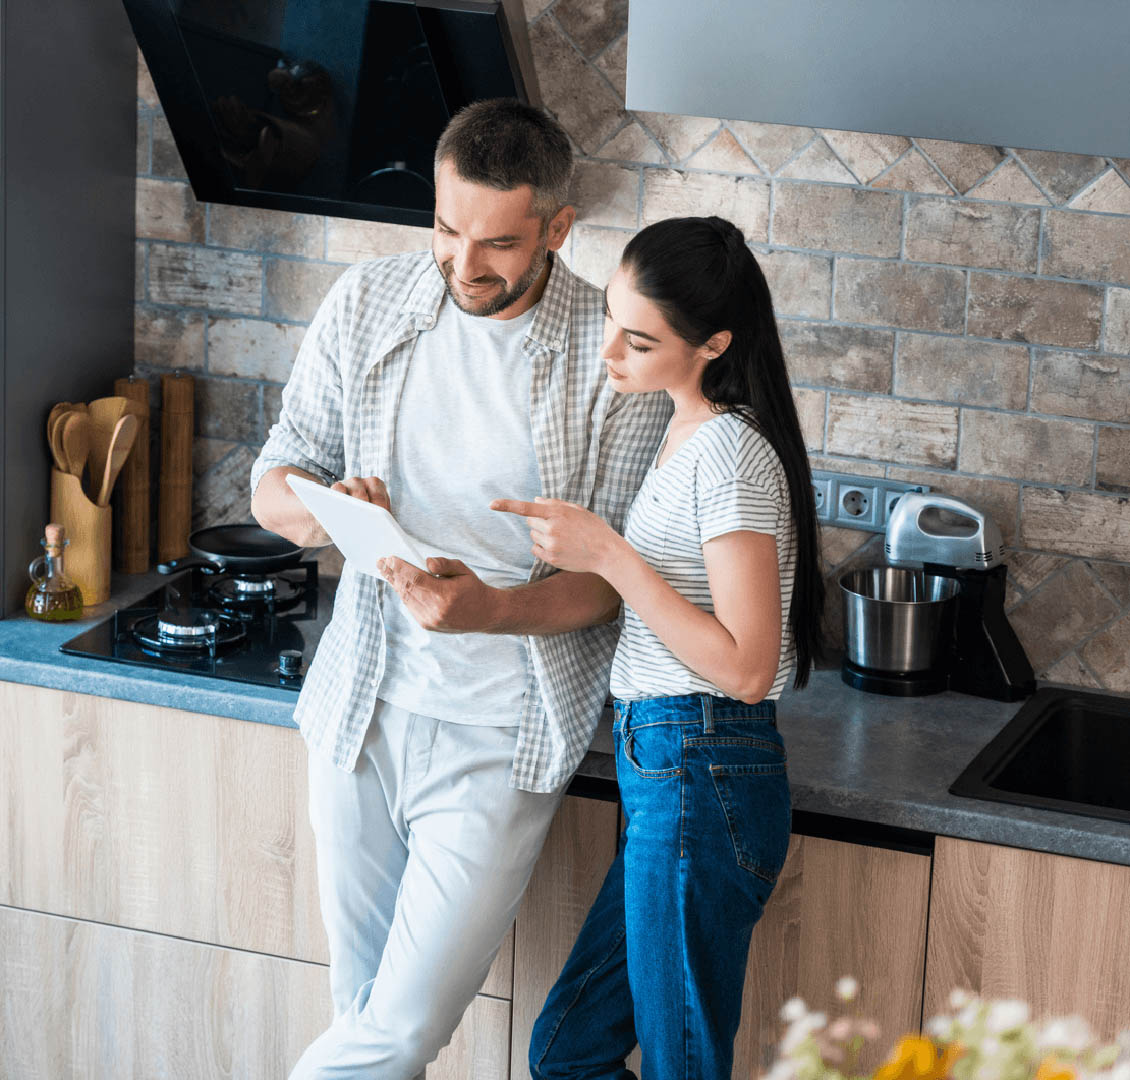 The Best Ways to Use Tech in Your New Home Couple Image